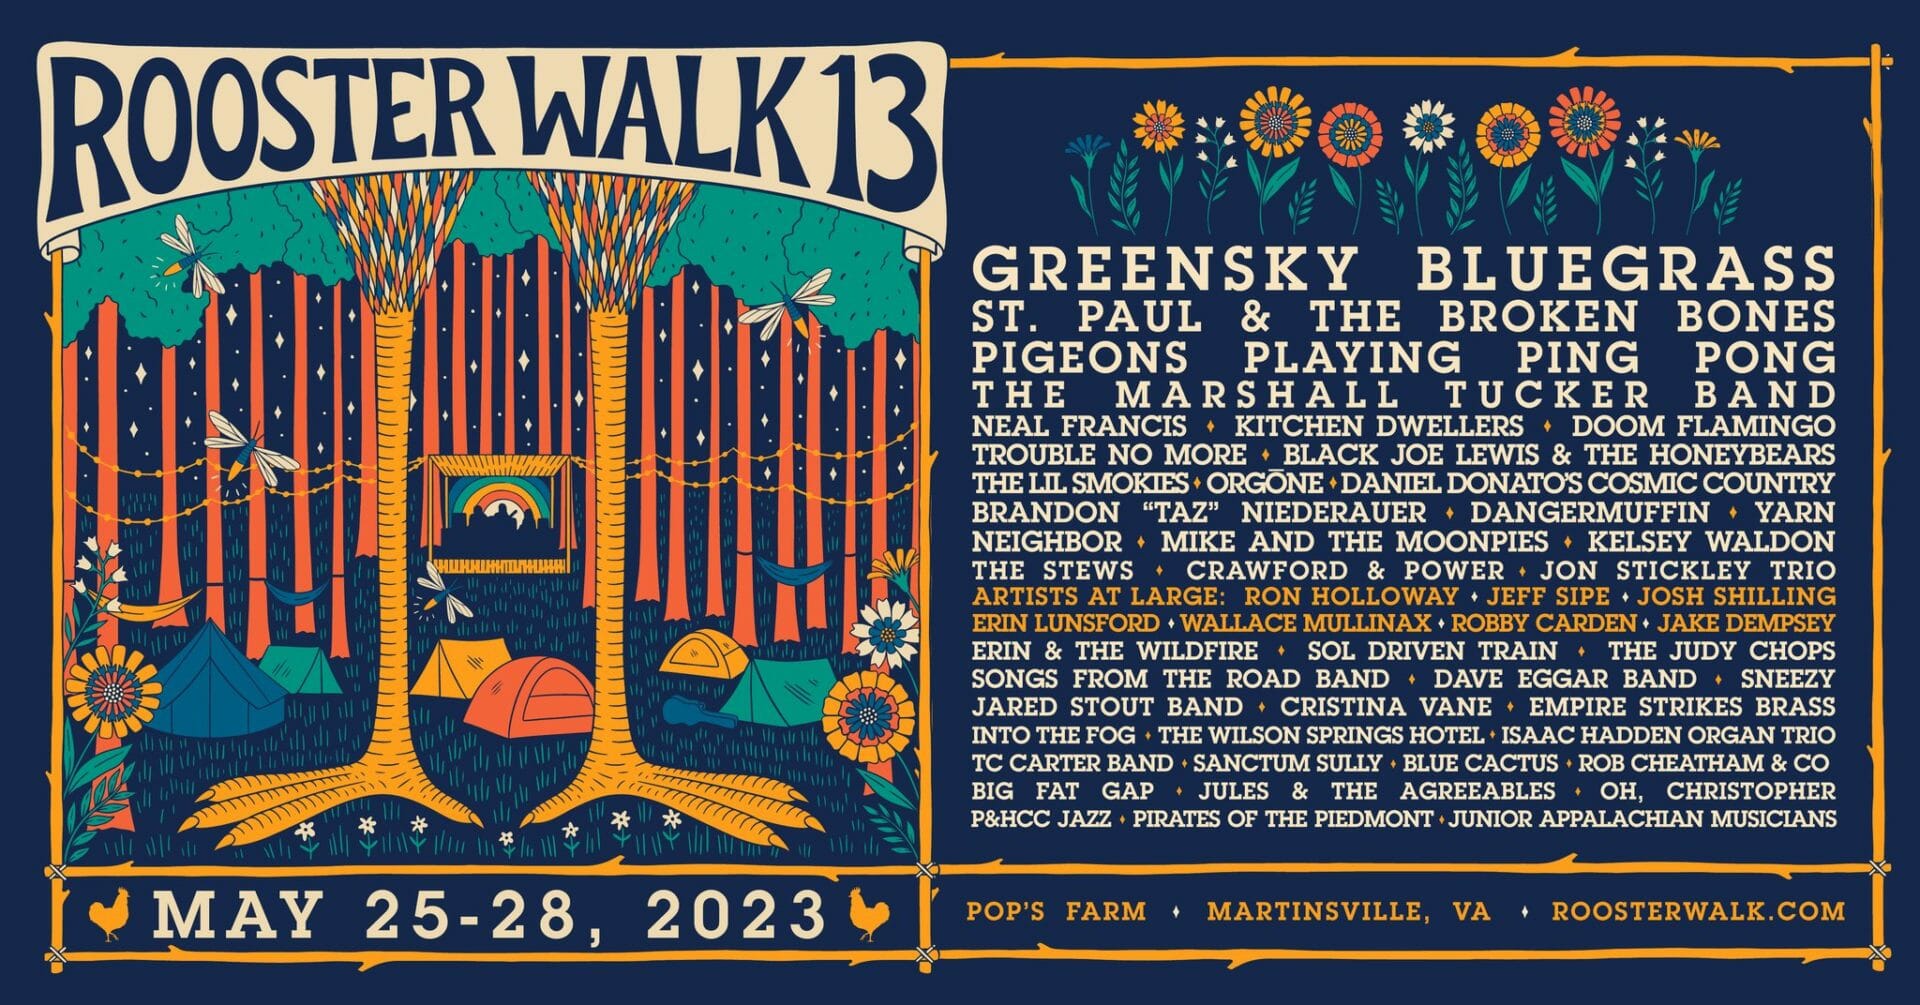 Rooster Walk 13 Finalizes Artist Lineup: Pigeons Playing Ping Pong, Black Joe Lewis & The Honeybears, The Lil’ Smokies and More